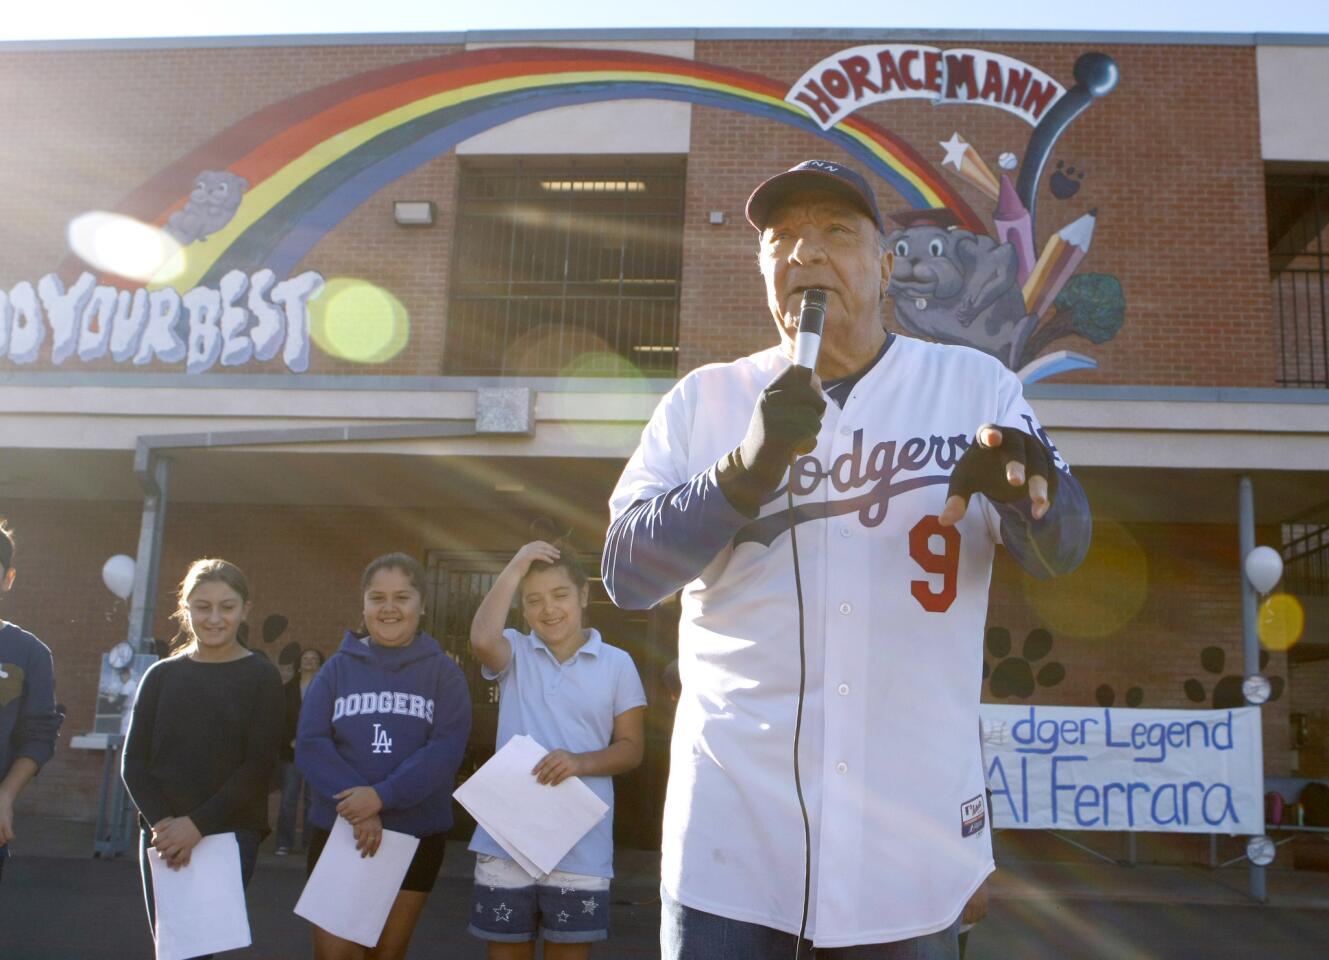 Los Angeles Dodgers legend Al Ferrara speaks at Horace Mann Elementary School volunteer thanksgiving rally on Friday, Nov. 18, 2016. The baseball great has volunteered at the school for about 7 years now.